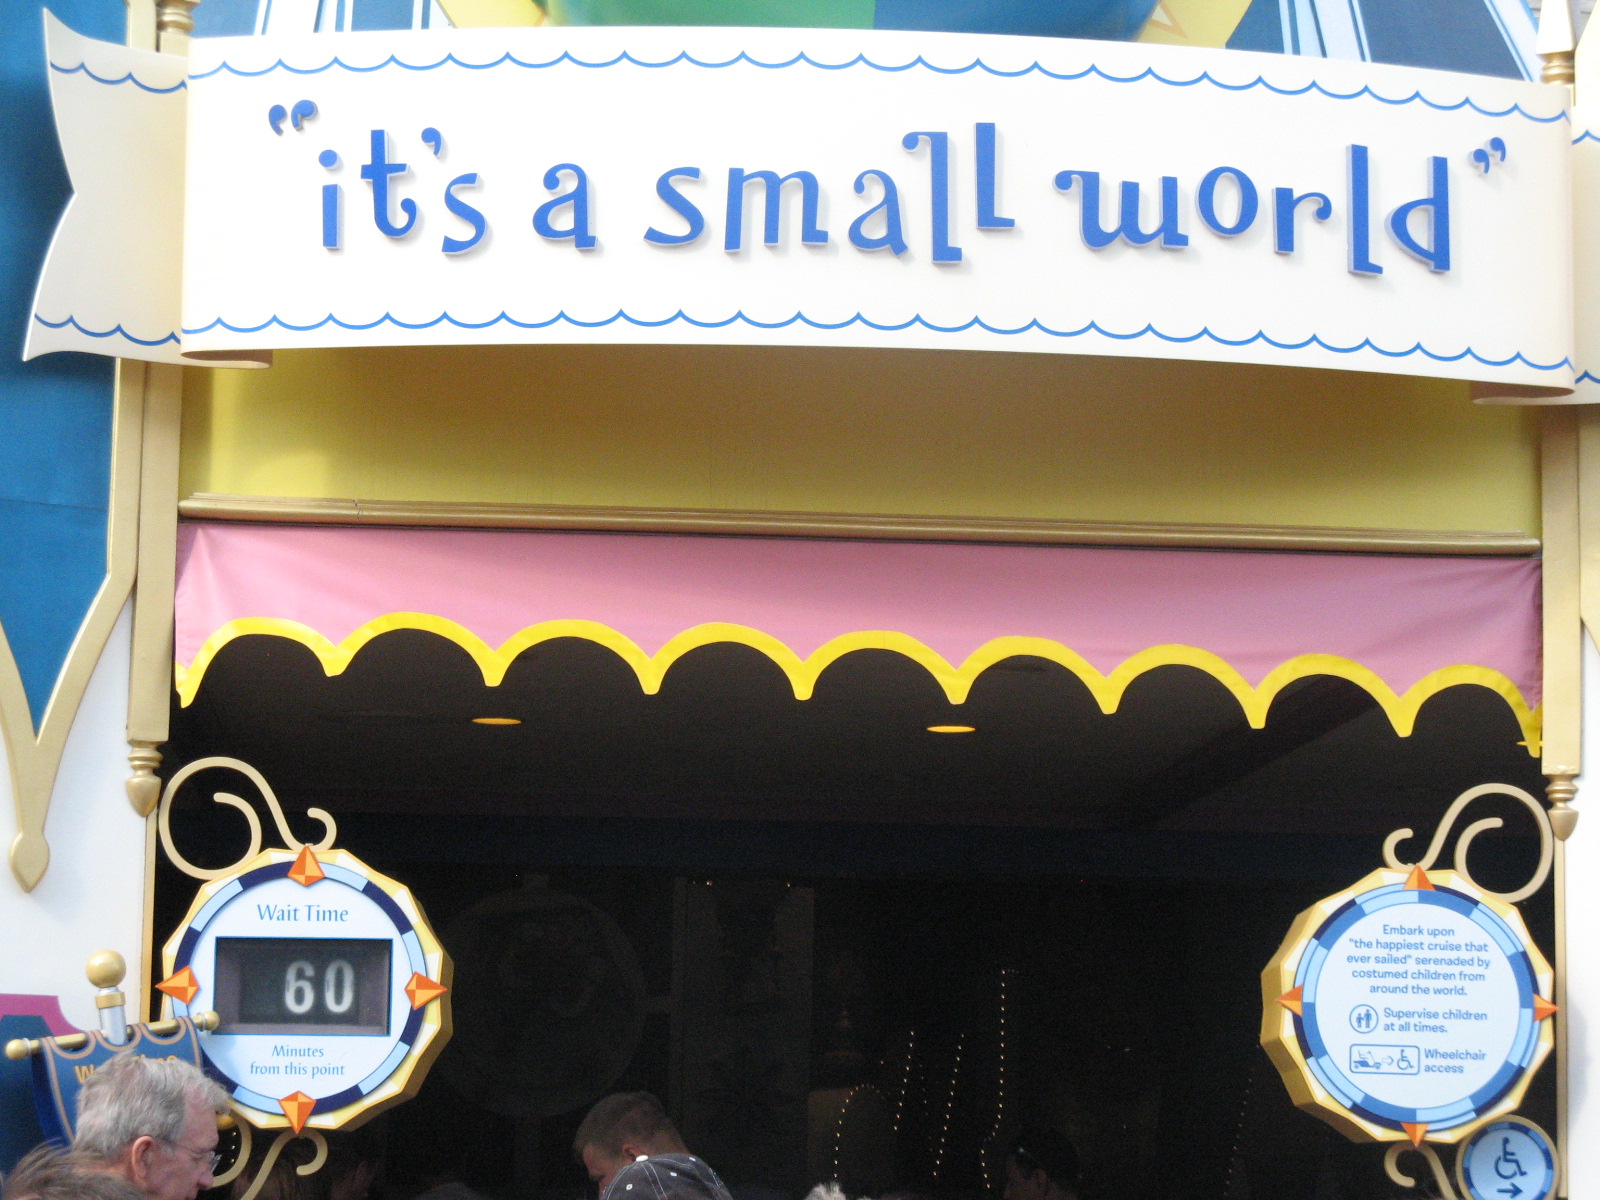 Small World sign